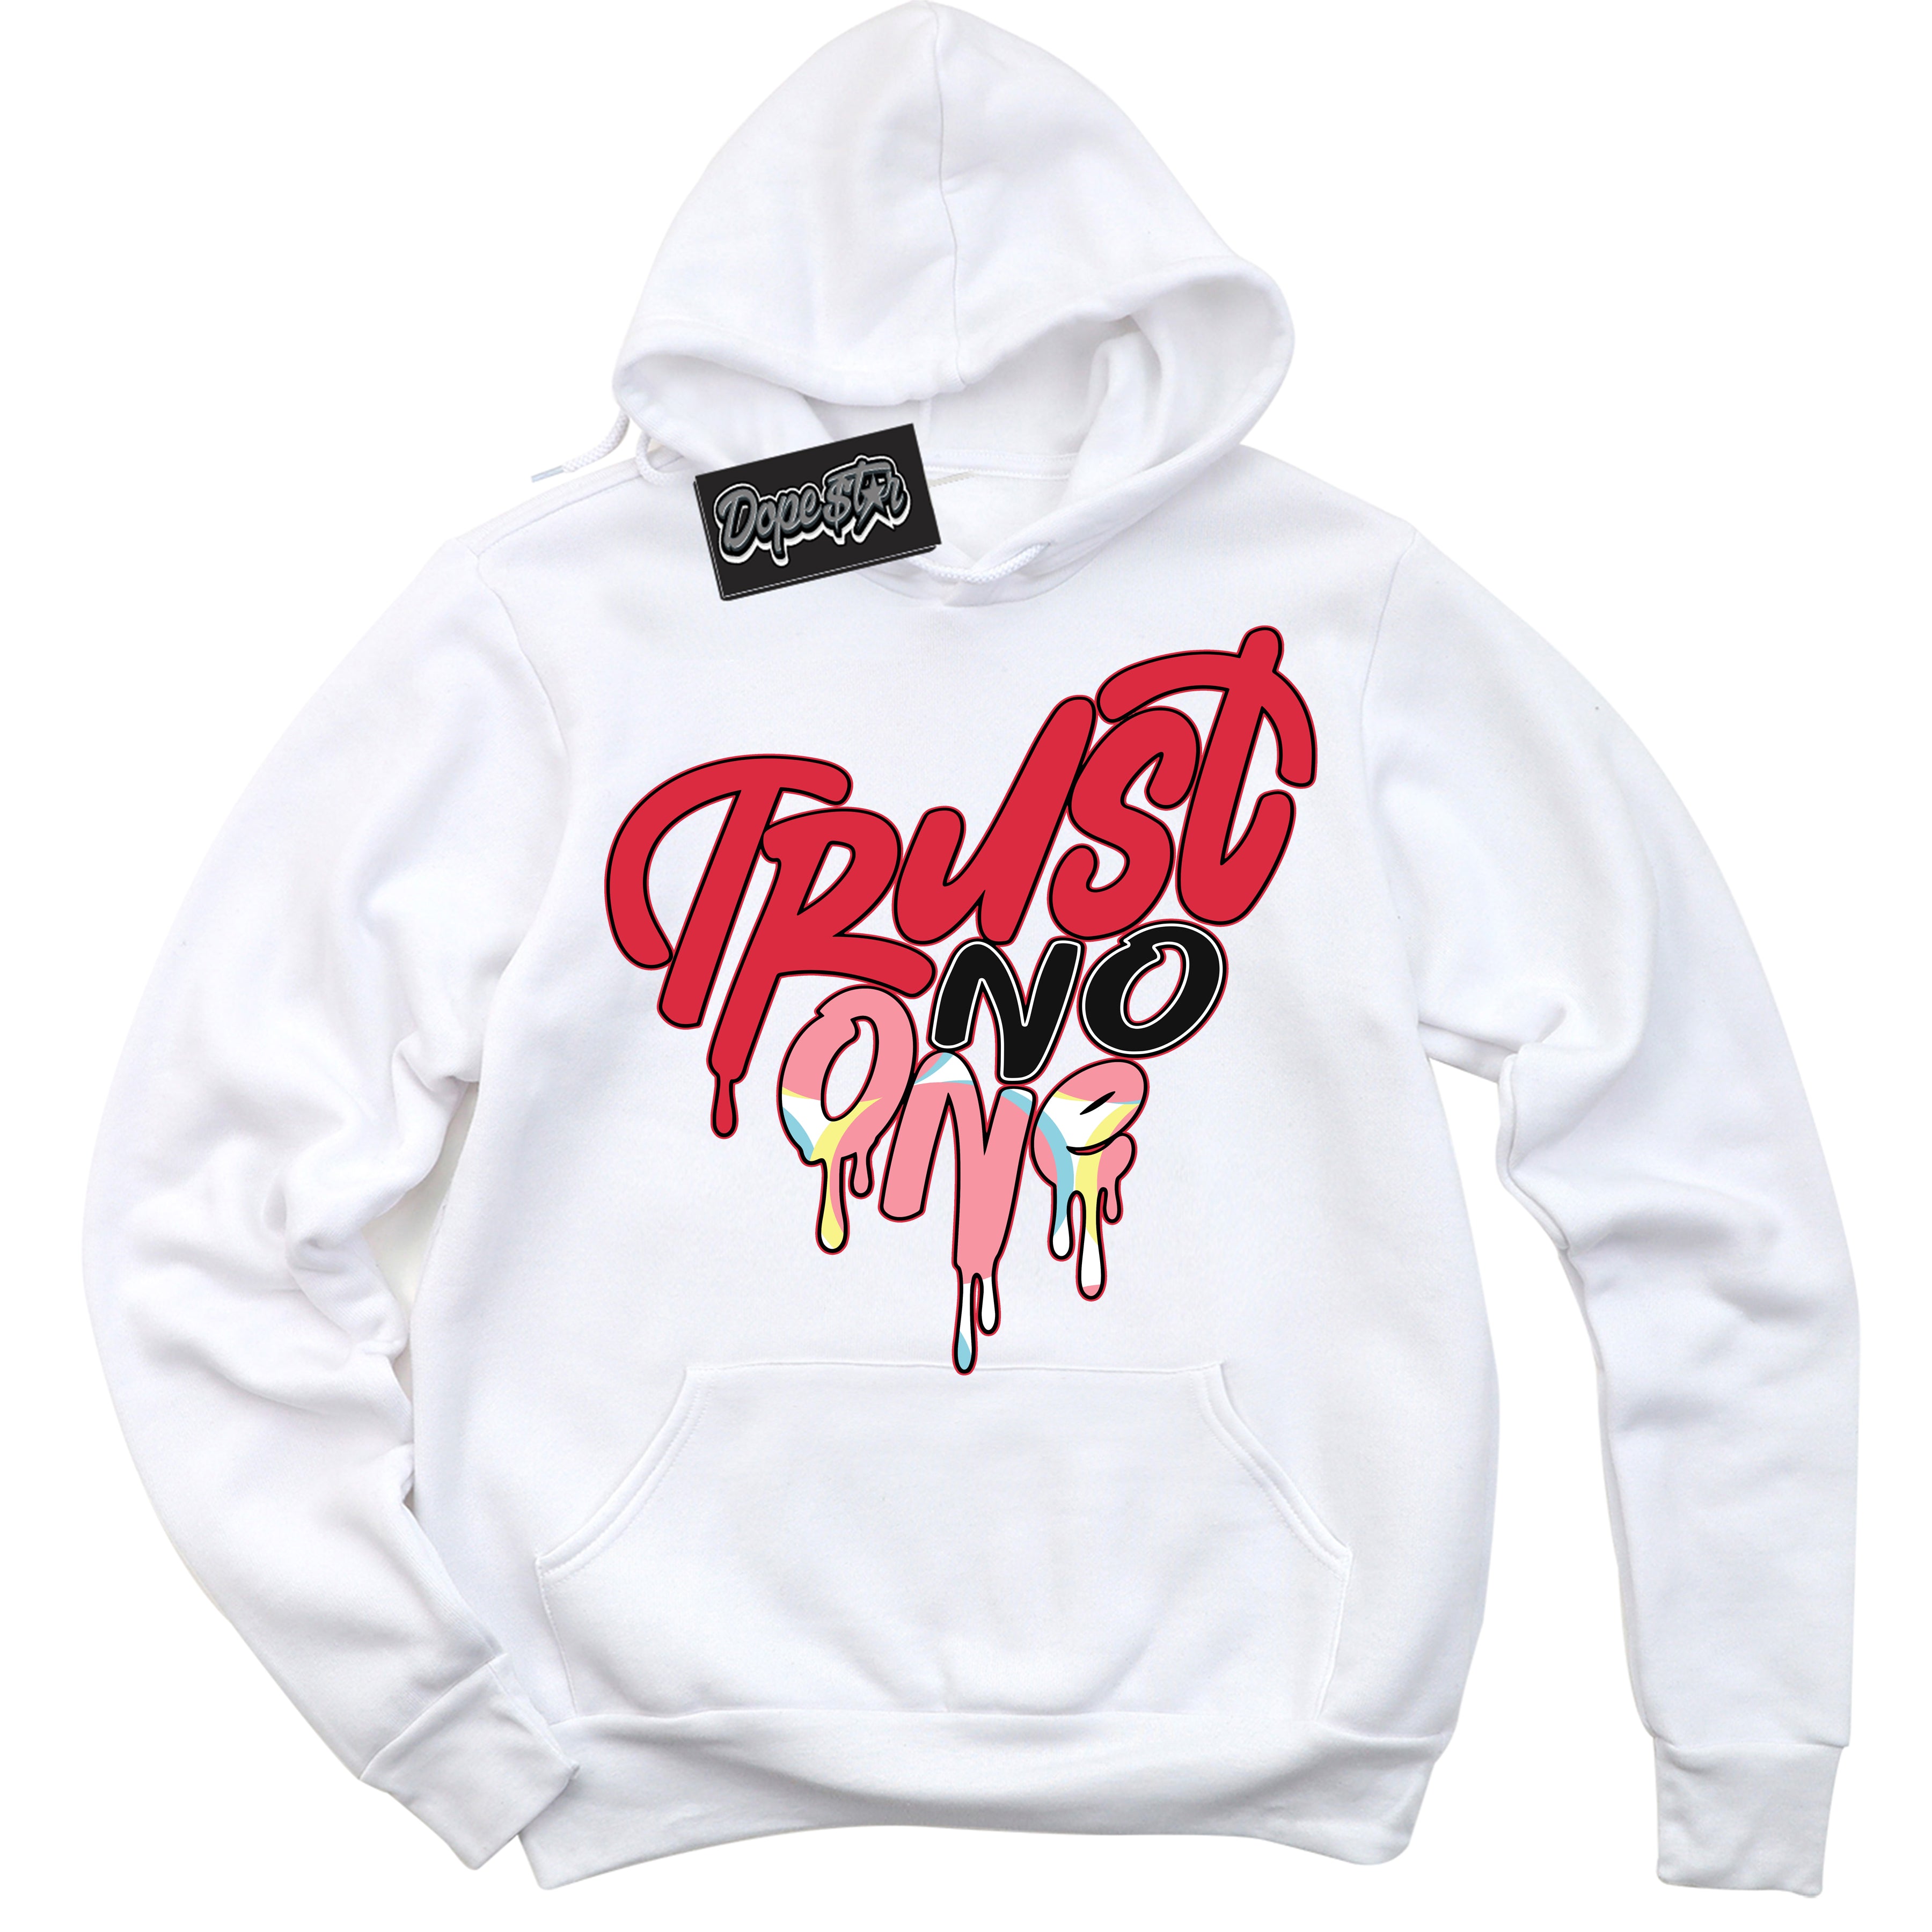 Cool White Graphic DopeStar Hoodie with “ Trust No One Heart “ print, that perfectly matches Spider-Verse 1s sneakers